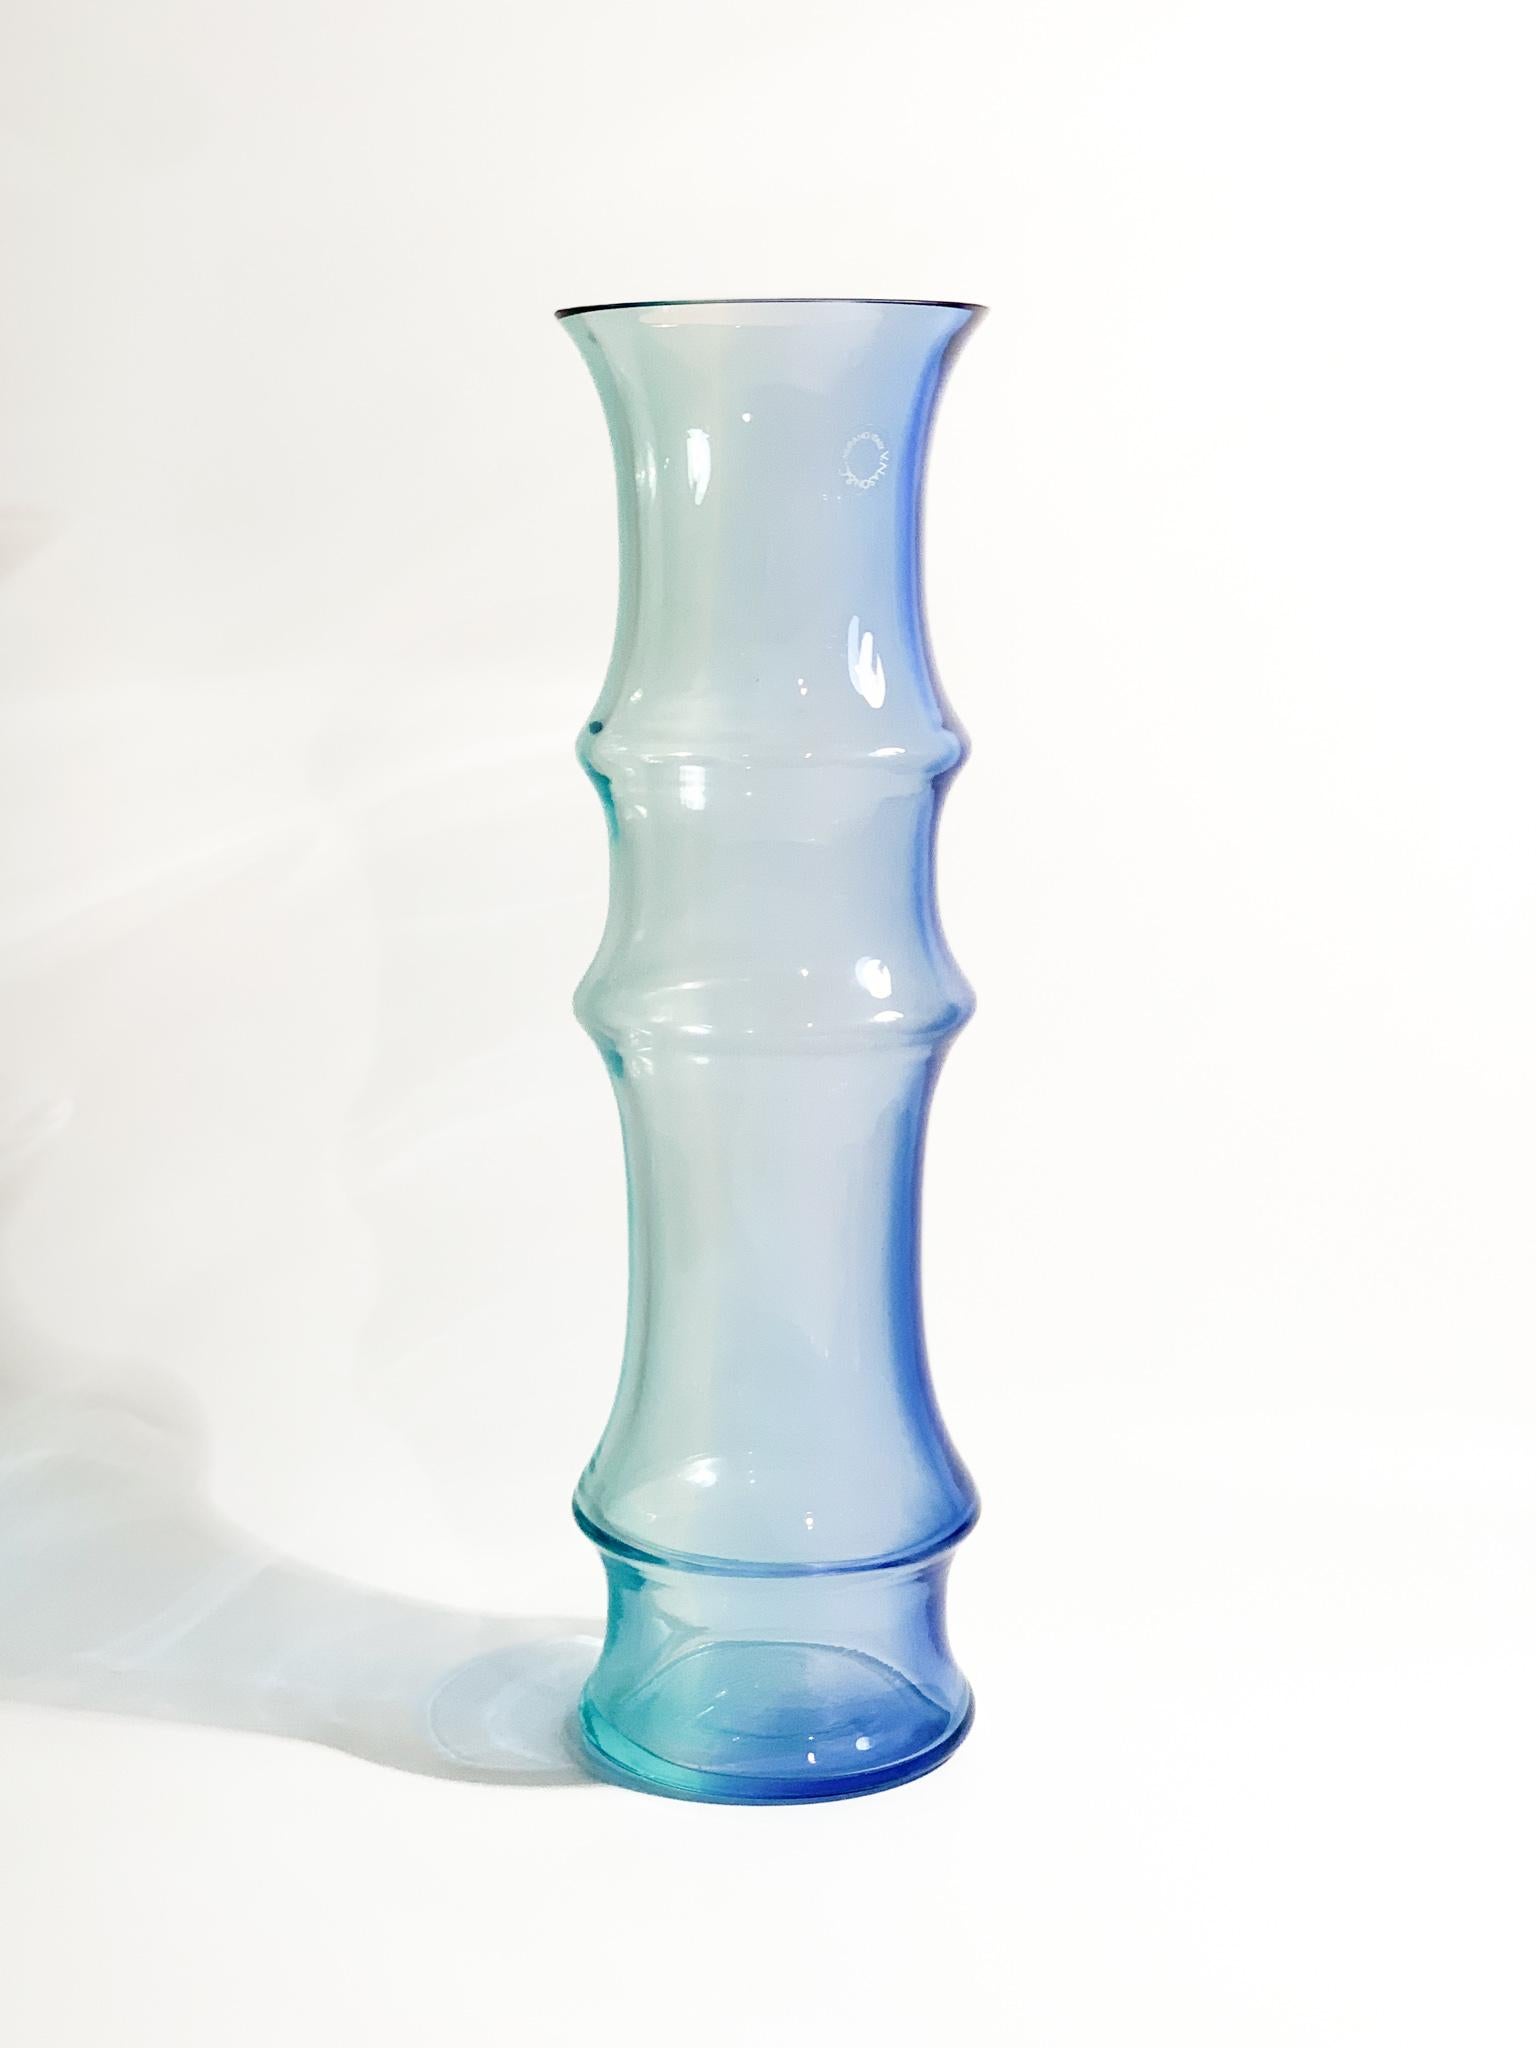 Light blue and blue Murano glass vase, Bambù model, made by Nason in the 1980s

Ø cm 12 h cm 40

Carlo Nason, born in Murano in 1935 from one of the oldest families of glassmakers on the island, he was a great master glassmaker. He grows up